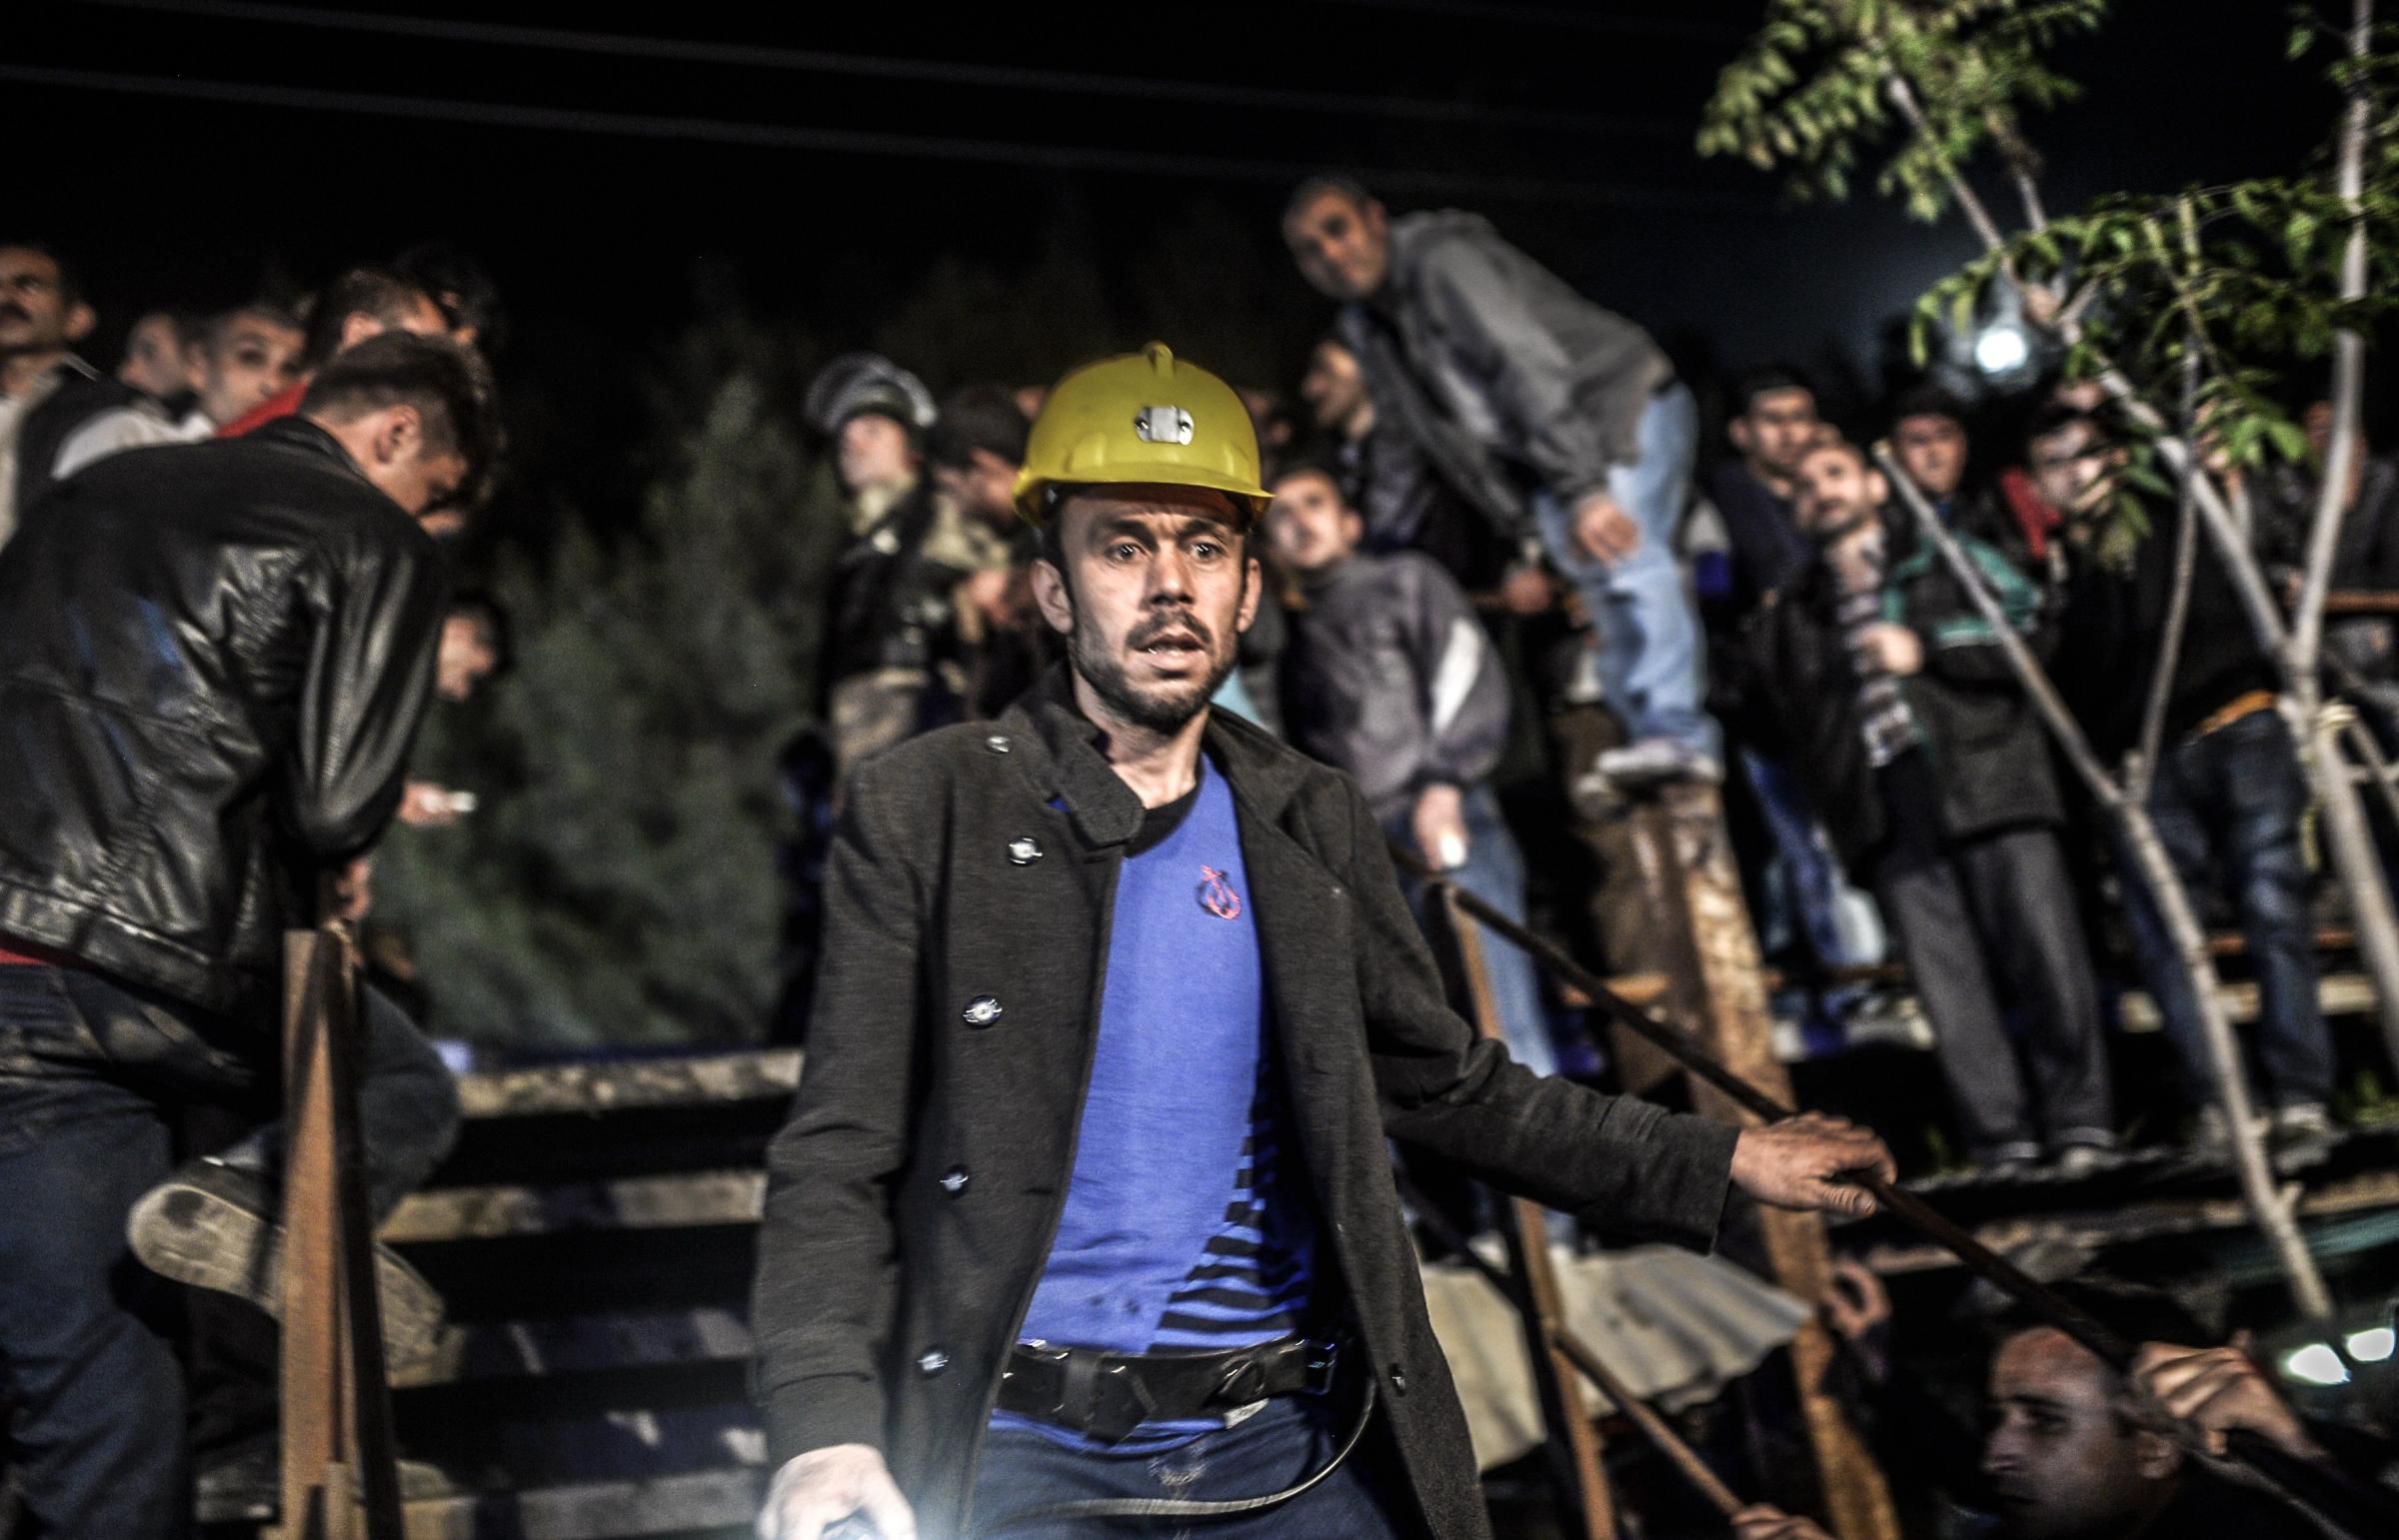 Miners wait at the gate of a mine after an explosion in Manisa on May 13, 2014.